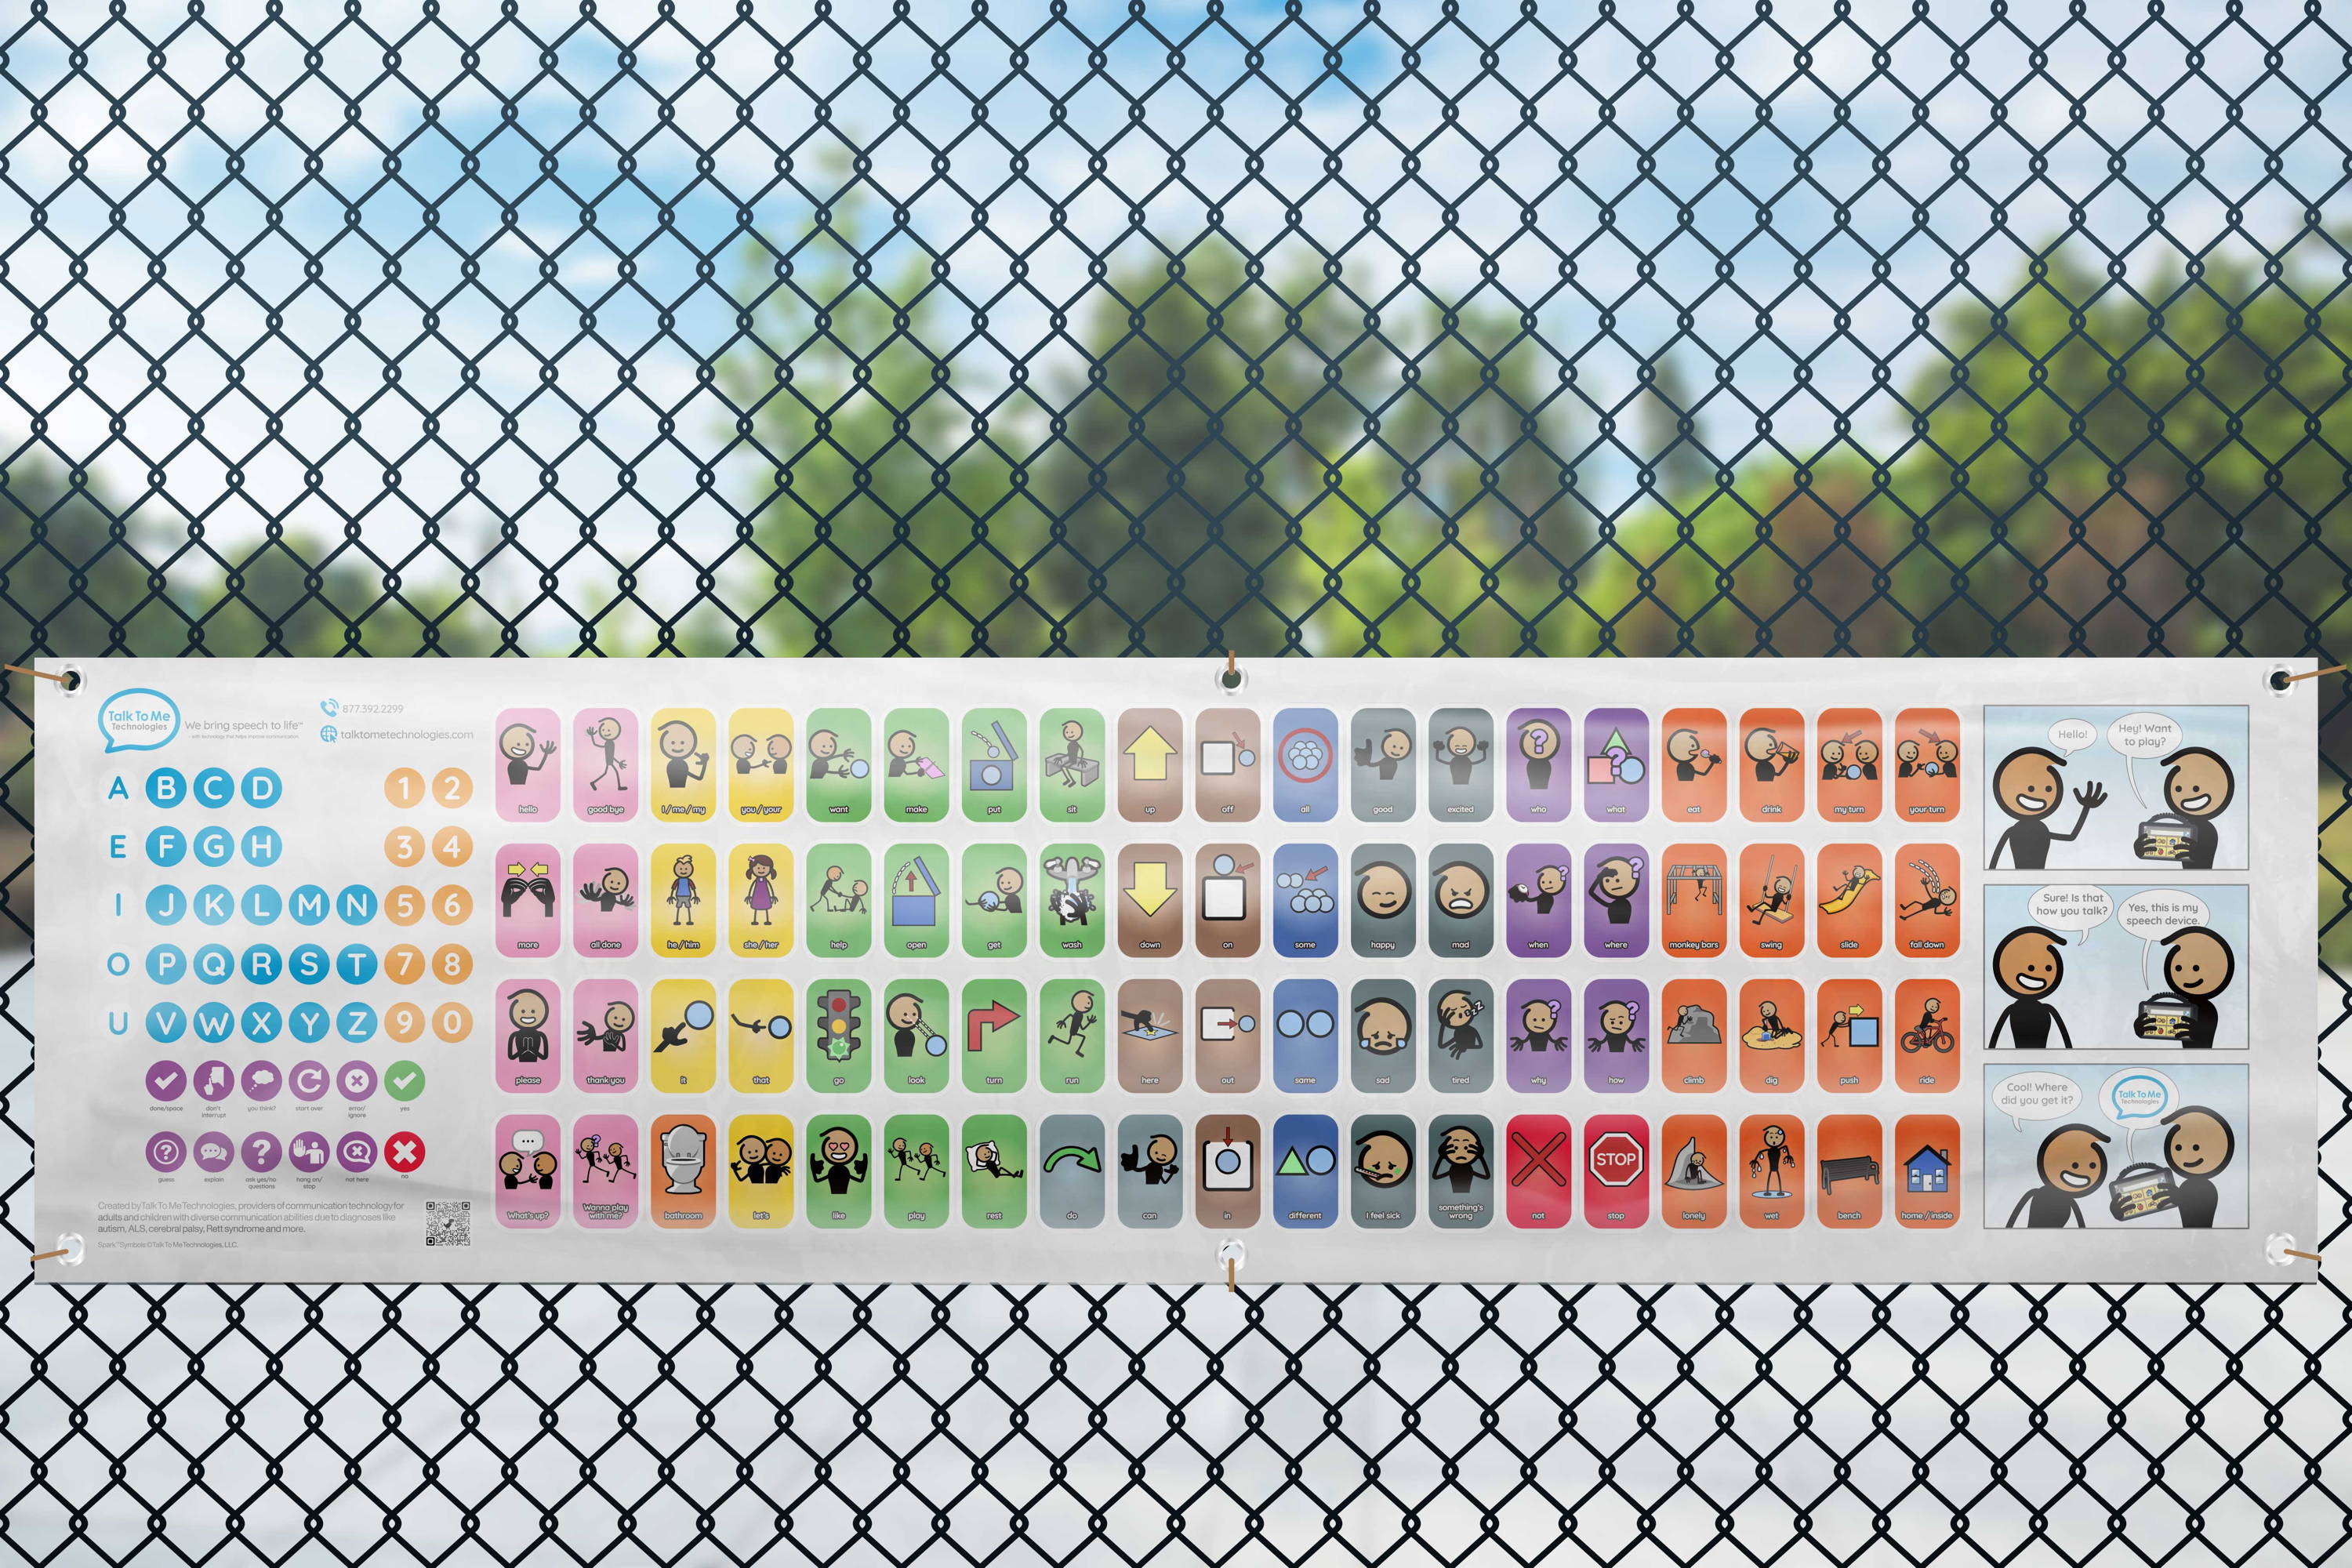 Vinyl communication board on chain link fence